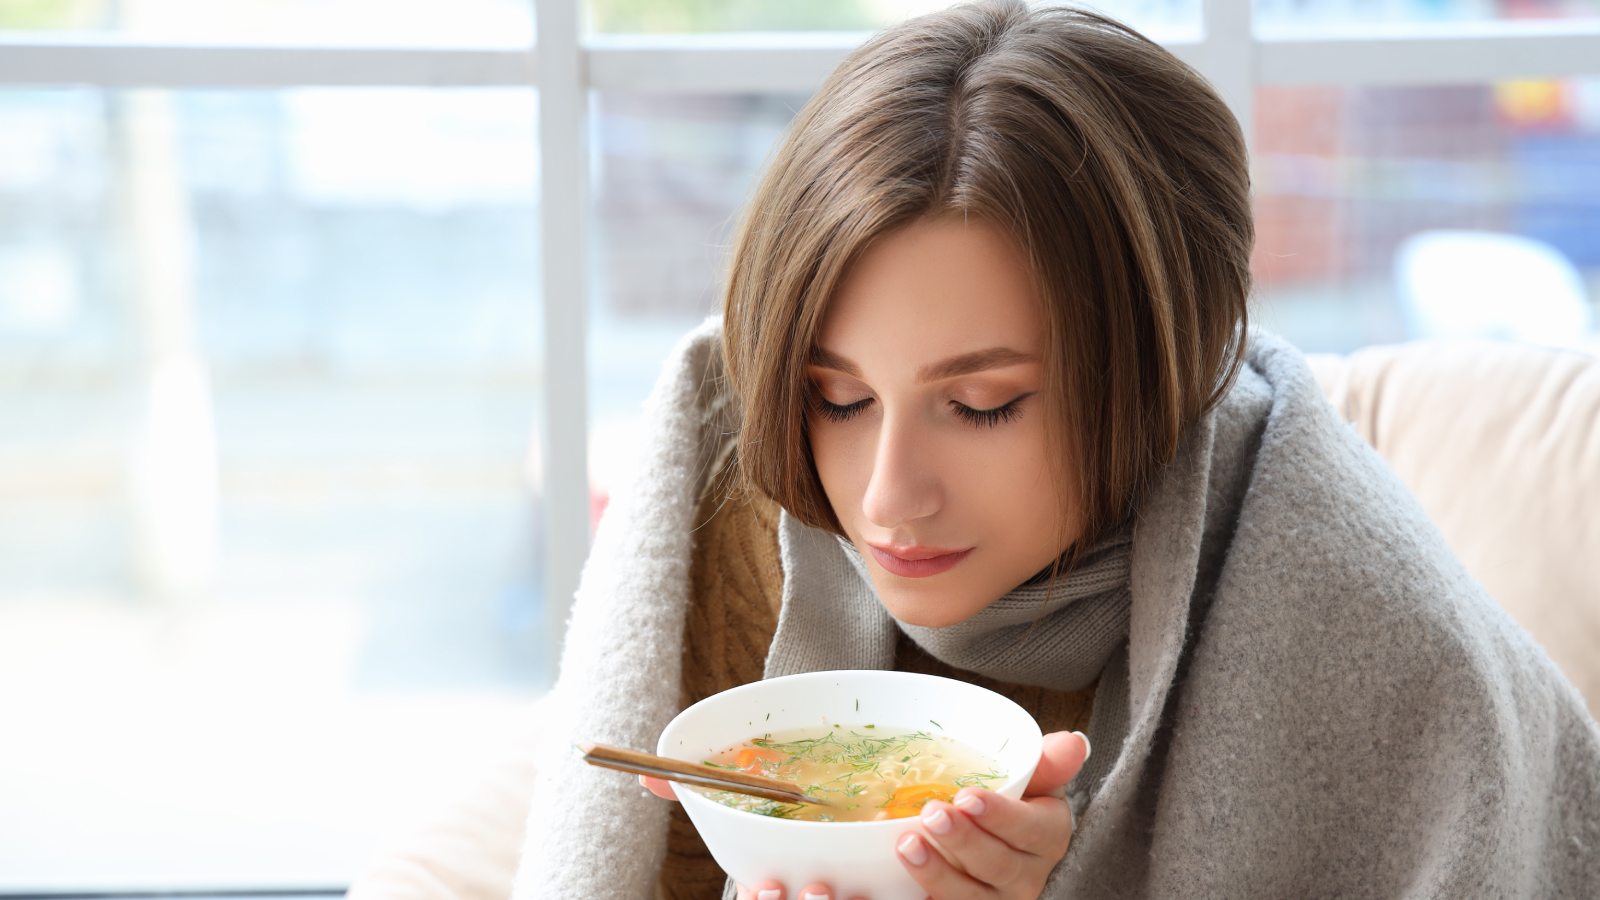 15 foods to eat when you are sick for quicker